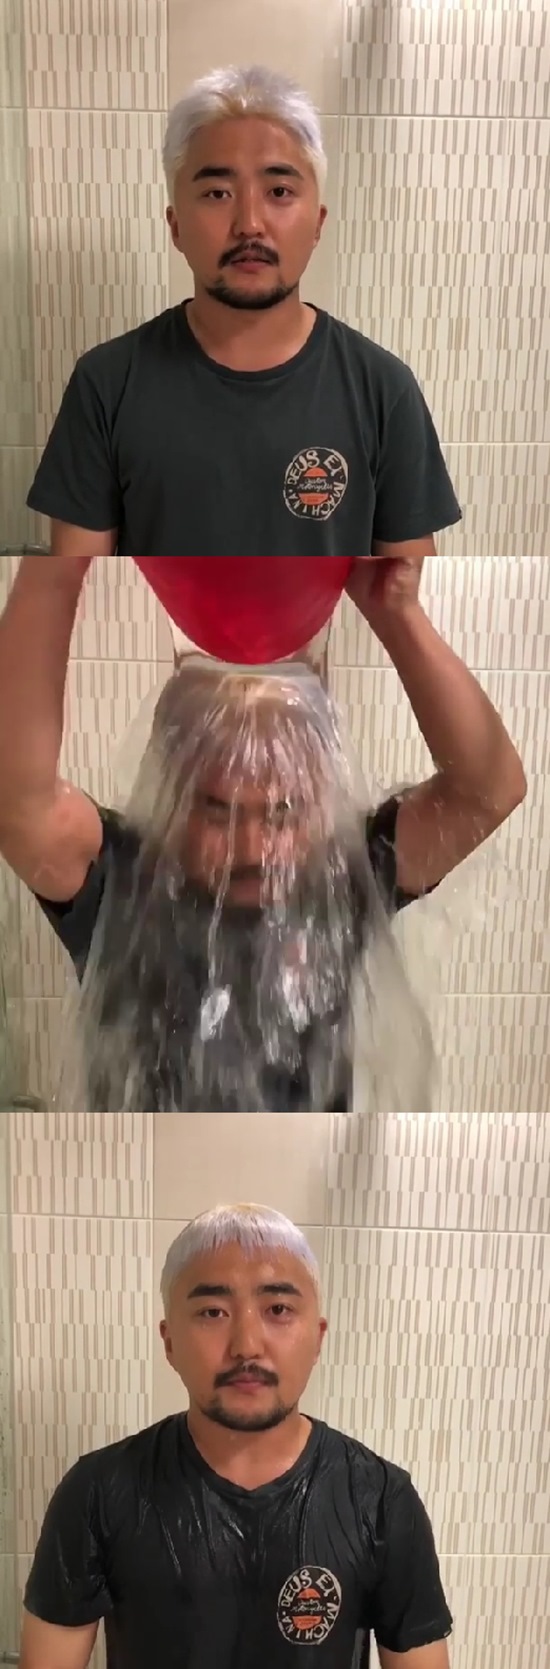 Broadcaster Yoo Byung-jae continued the Ice Bucket Challenge Lindsey Vonn.On October 10, Yoo Byung-jae released a video and a Donation history challenging the Ice Bucket Challenge on his instagram.He was named by comedian Kim Soo-yong, group Biggs Yen, Nam Tae-hyun and Shin Woo-suk, and joined the Ice Bucket Challenge Lindsey Vonn.Yoo Byung-jae encouraged your participation by posting I would like to ask your attention to the completion of the first Lou Gehrig nursing home in Korea.Since then, Yoo Byung-jae has poured water on his head, followed by his brother and friend together with Manager Yoo Kyu-sun, who appeared on MBC Point of Omniscient Interfere.He also released a story about the donation of 1 million One to the Hope Foundation.Photo = Yoo Byung-jae Instagram